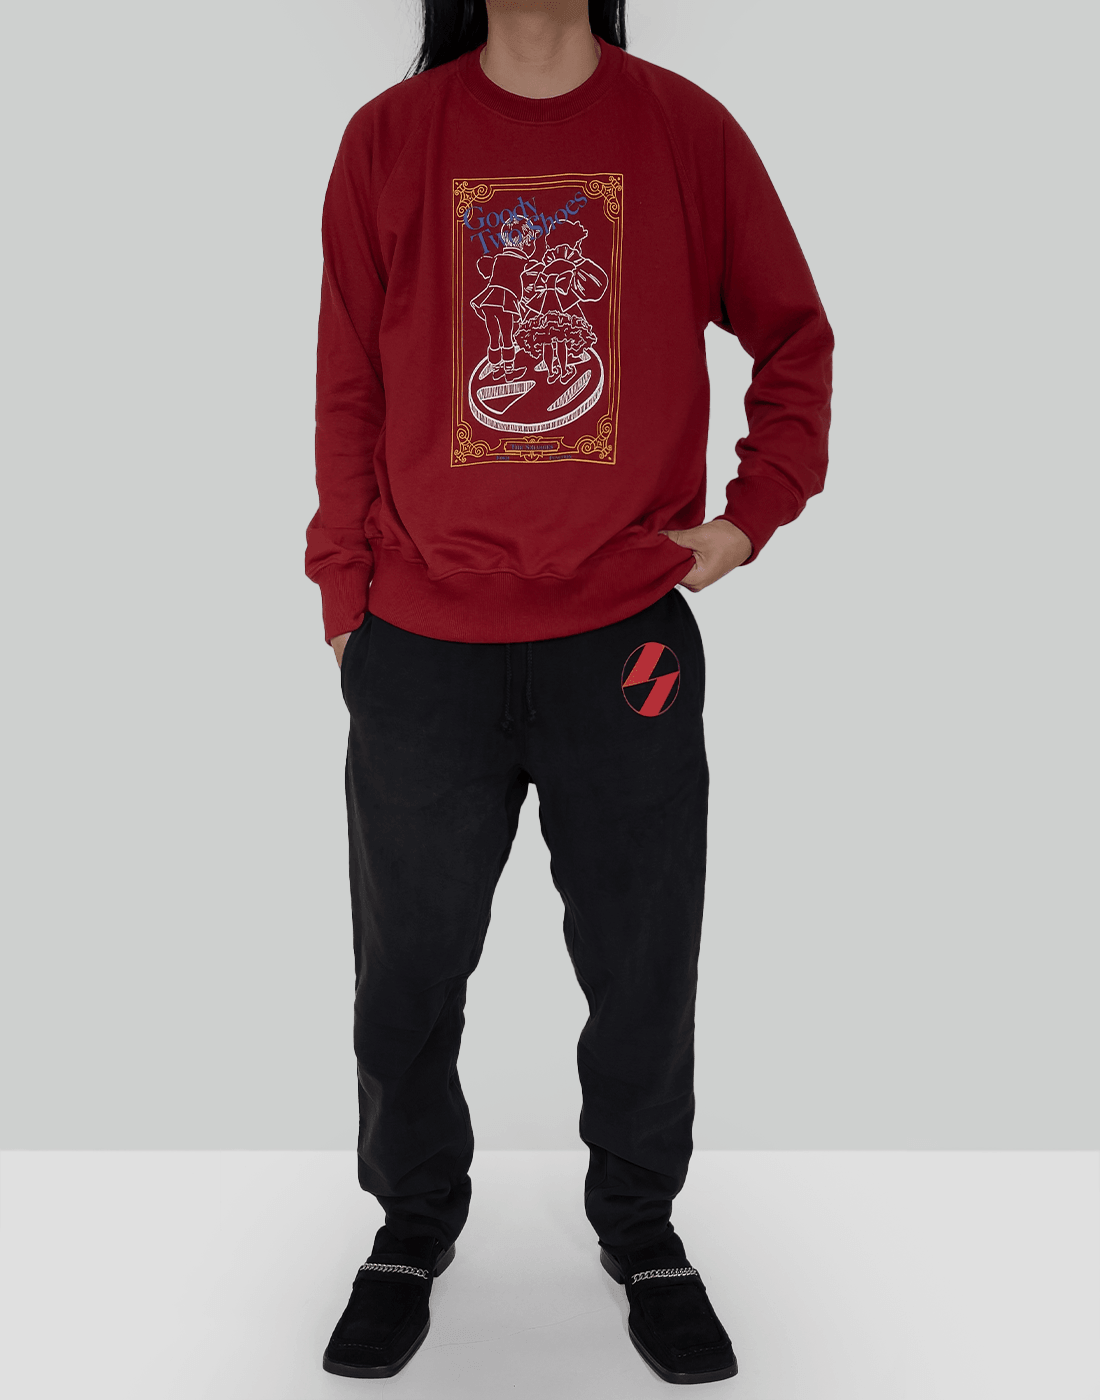 THE SALVAGES GOODY TWO SHOES CREWNECK SWEATER - 082plus